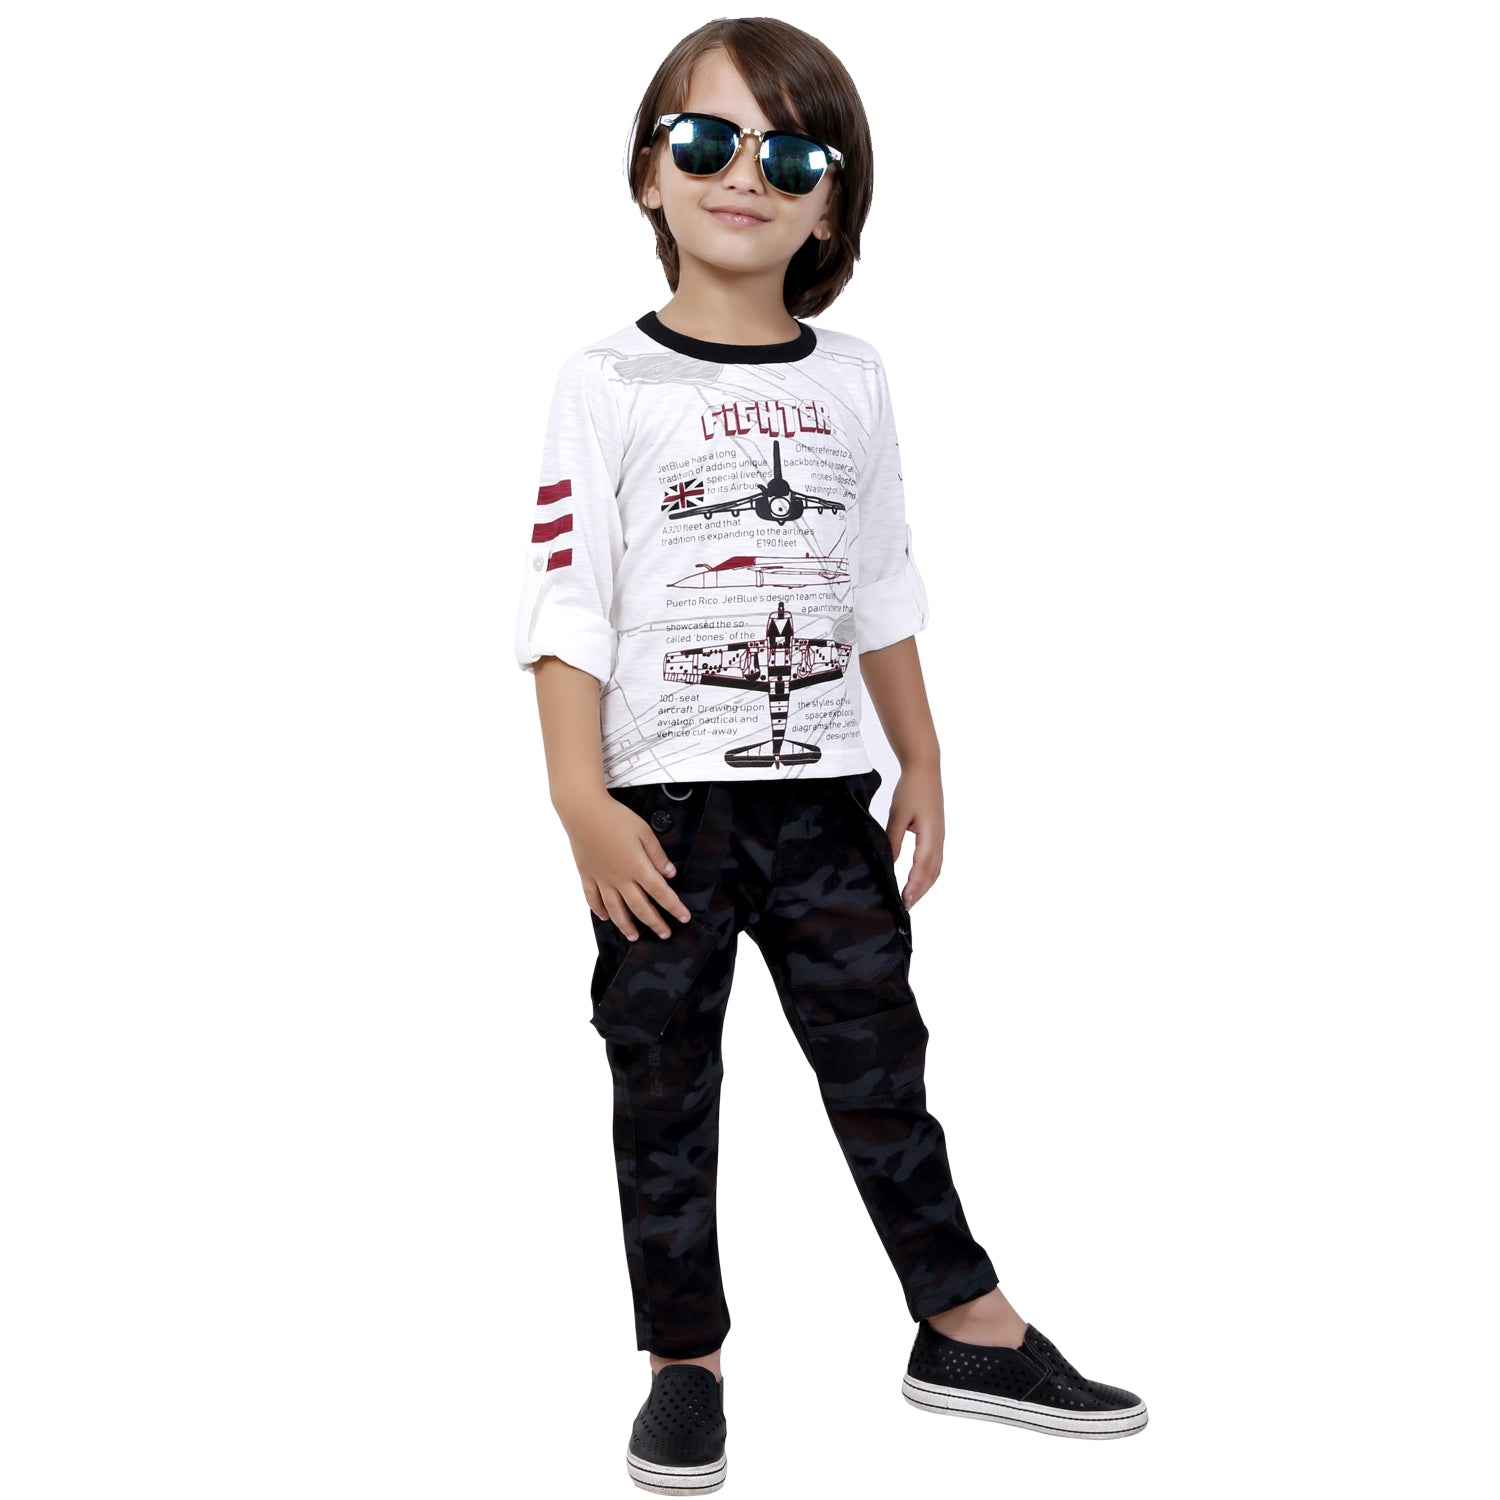 Bad Boys Stylish and Casual Outfit with T-shirt and Dungaree - mashup boys